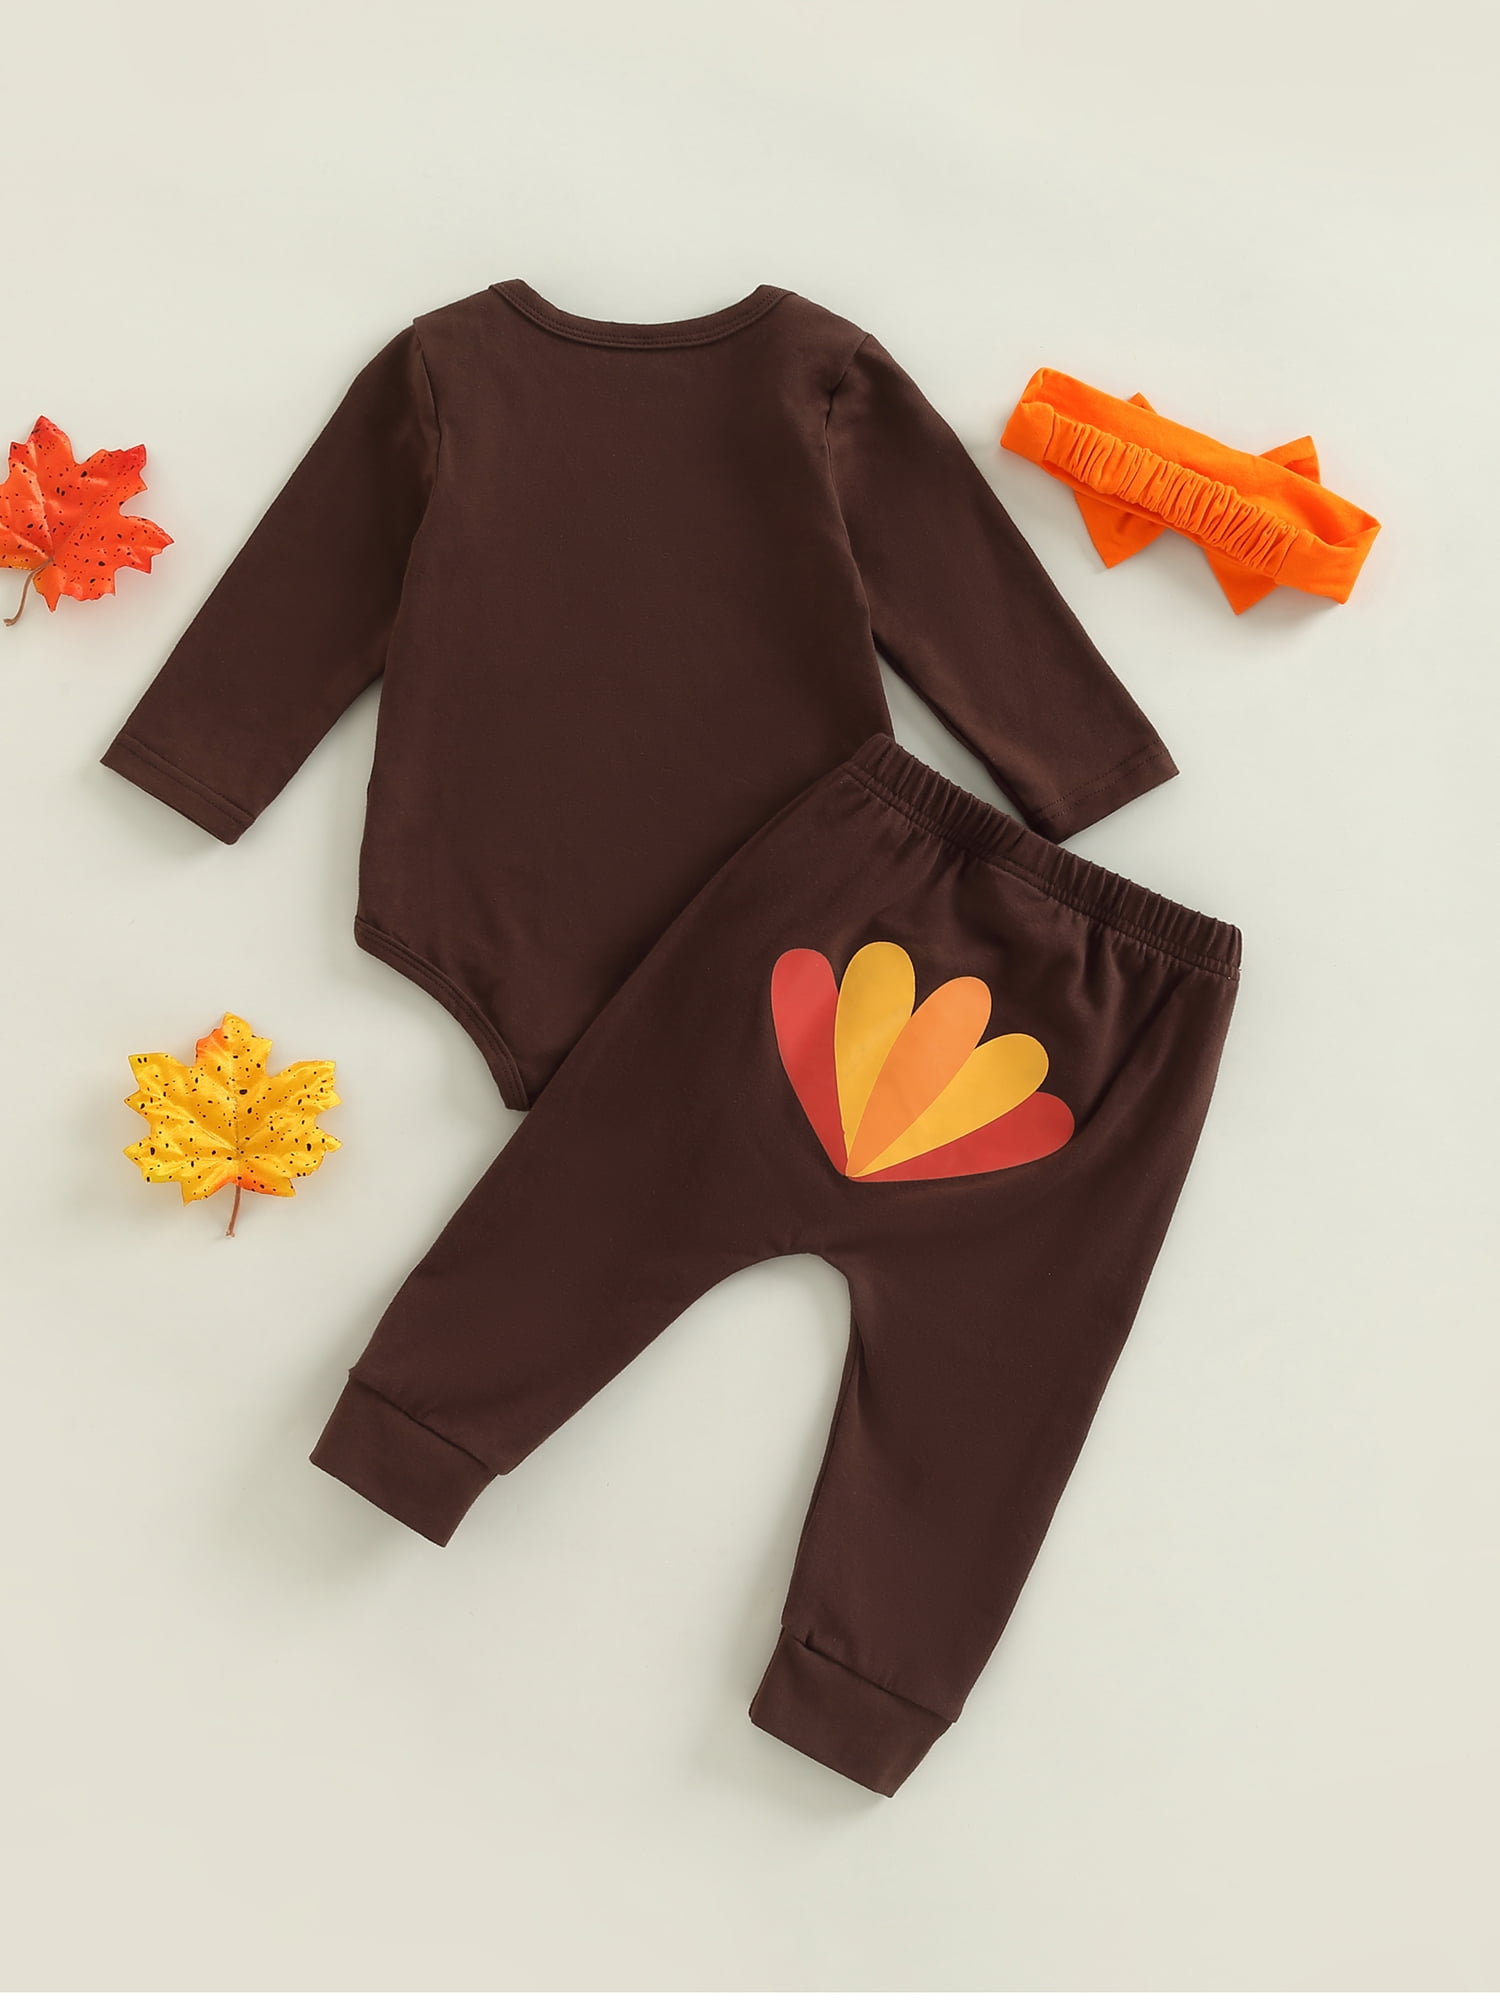 Kayotuas My First Thanksgiving Baby Girl Boy Outfit Long Sleeve Romper Bodysuit Tops Turkey Pants Headband Clothes Set